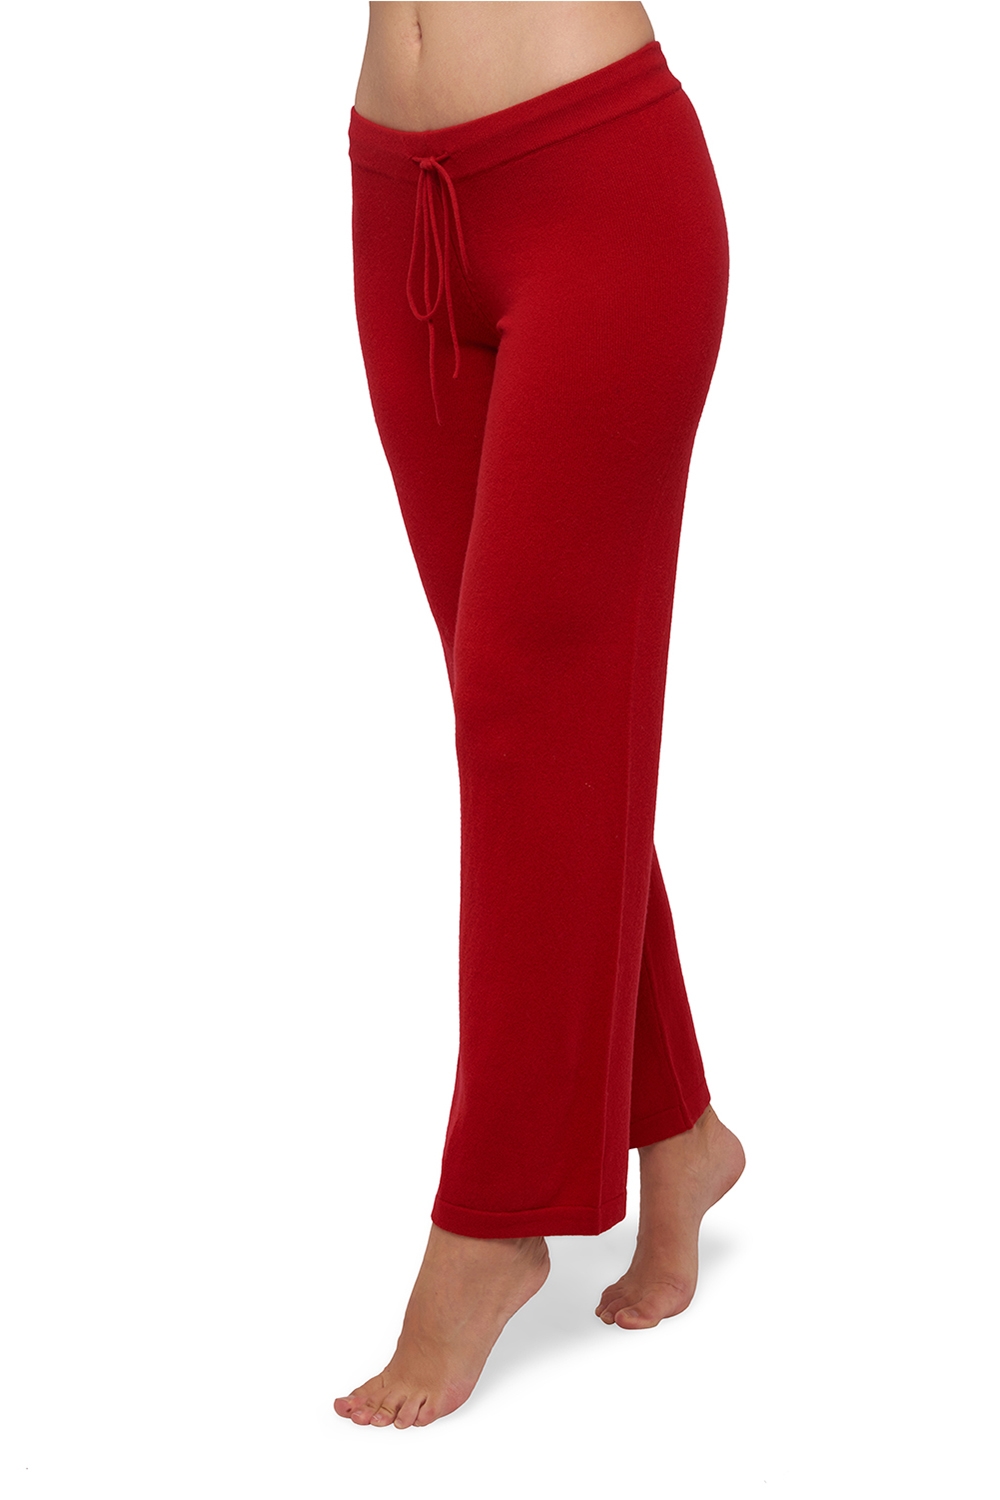 Cashmere ladies timeless classics malice blood red xl